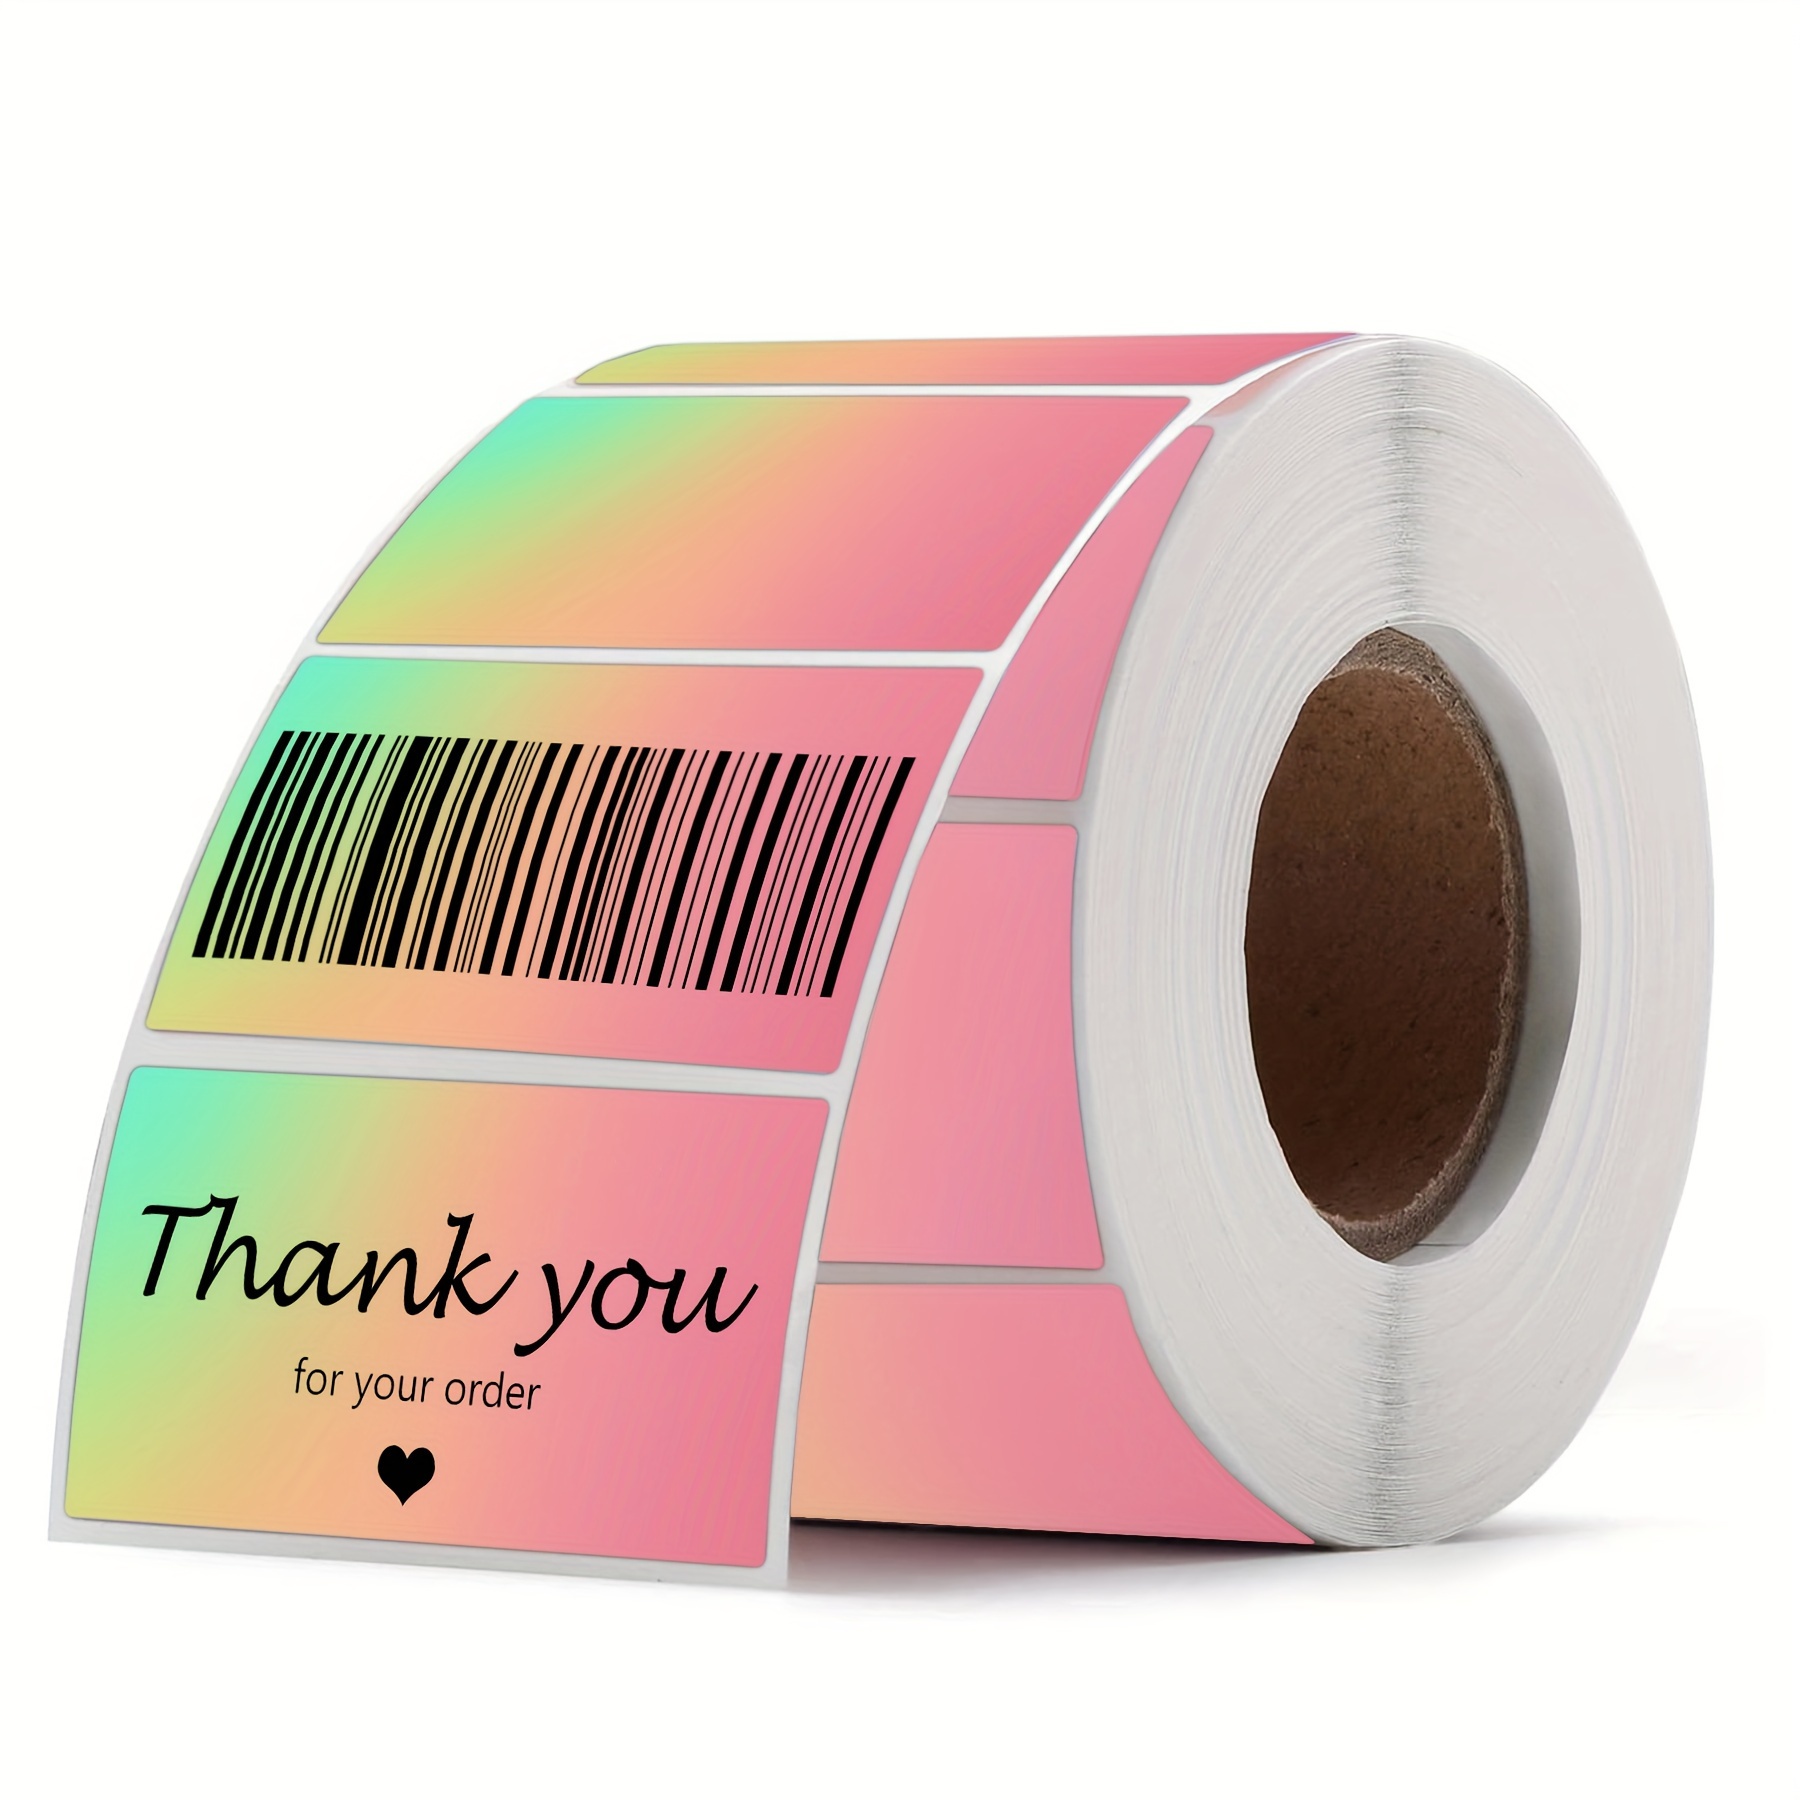 

500 Pcs Direct Thermal Stickers Gradual Change Round Circle Thermal Color-code Dot Self-adhesive Multi-purpose Thermal Labels Printer For Diy Barcode, Business, Address, Name Gift Tags